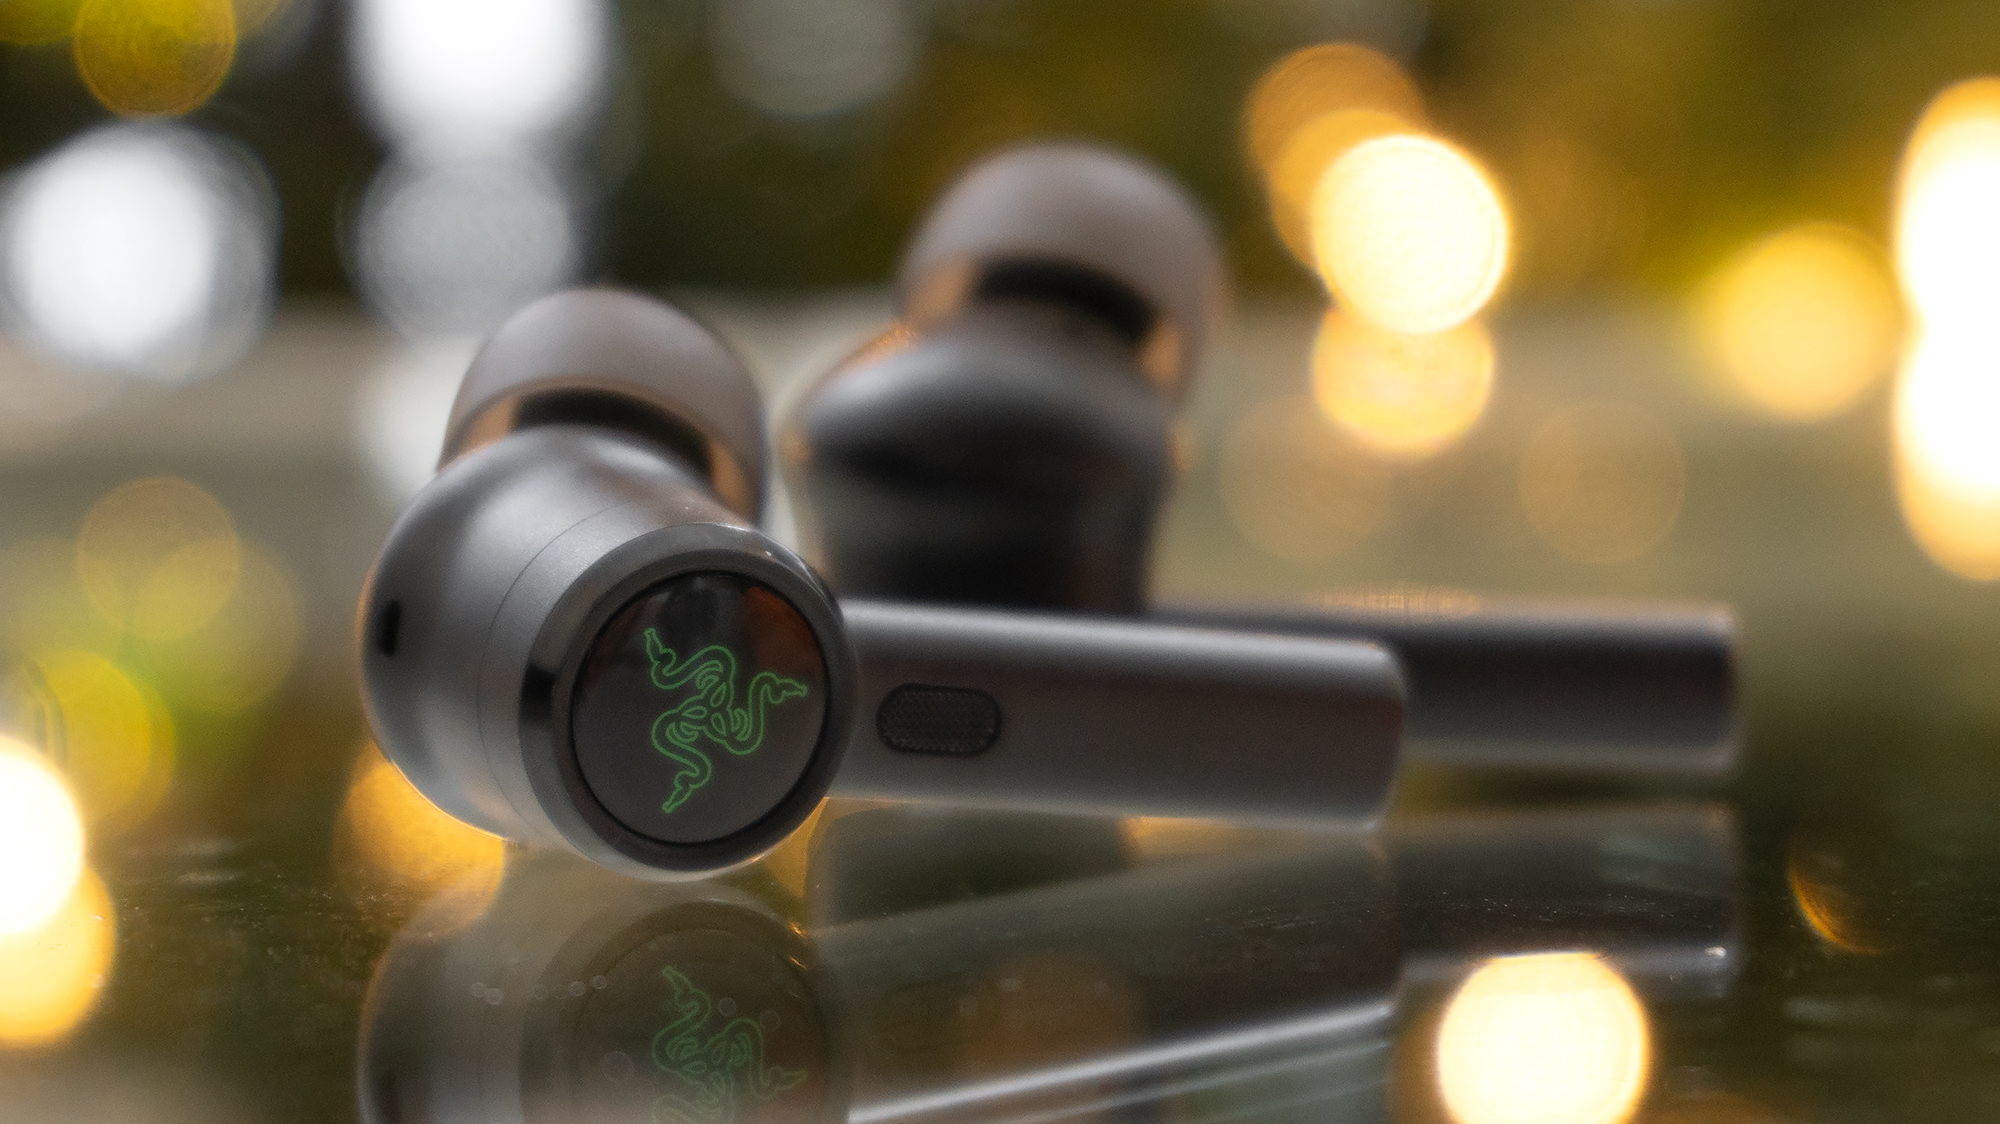 Dual mics give the Hammerhead True Wireless Pro solid active noise cancelling capabilities, but it's not the best ANC you'll find on wireless earbuds. (Photo: Andrew Liszewski / Gizmodo)